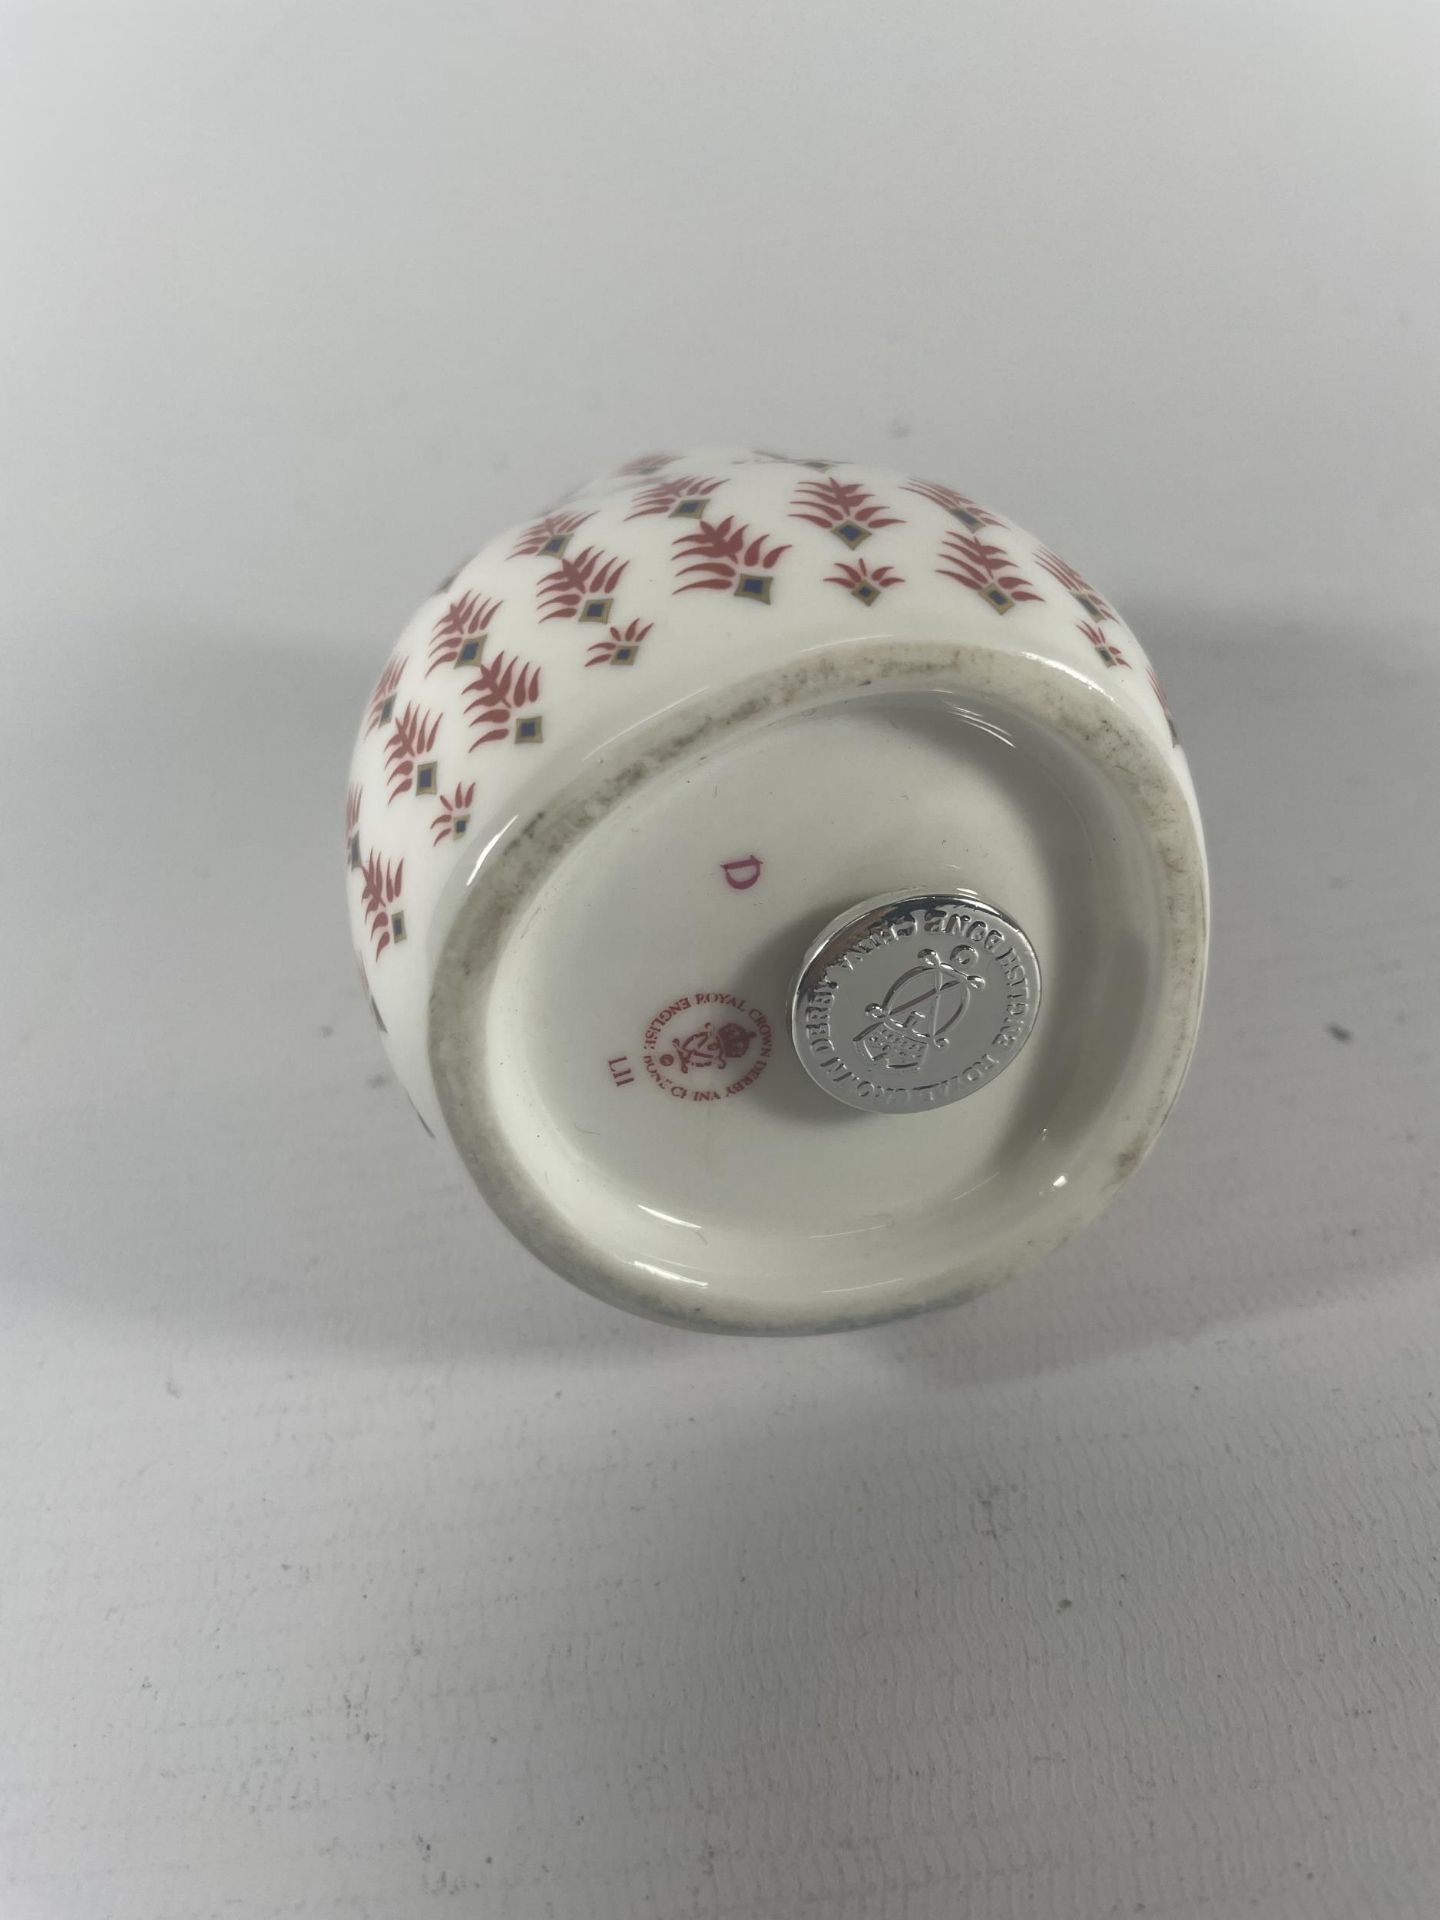 A ROYAL CROWN DERBY HAMSTER PAPERWEIGHT WITH GOLD STOPPER - Image 5 of 5